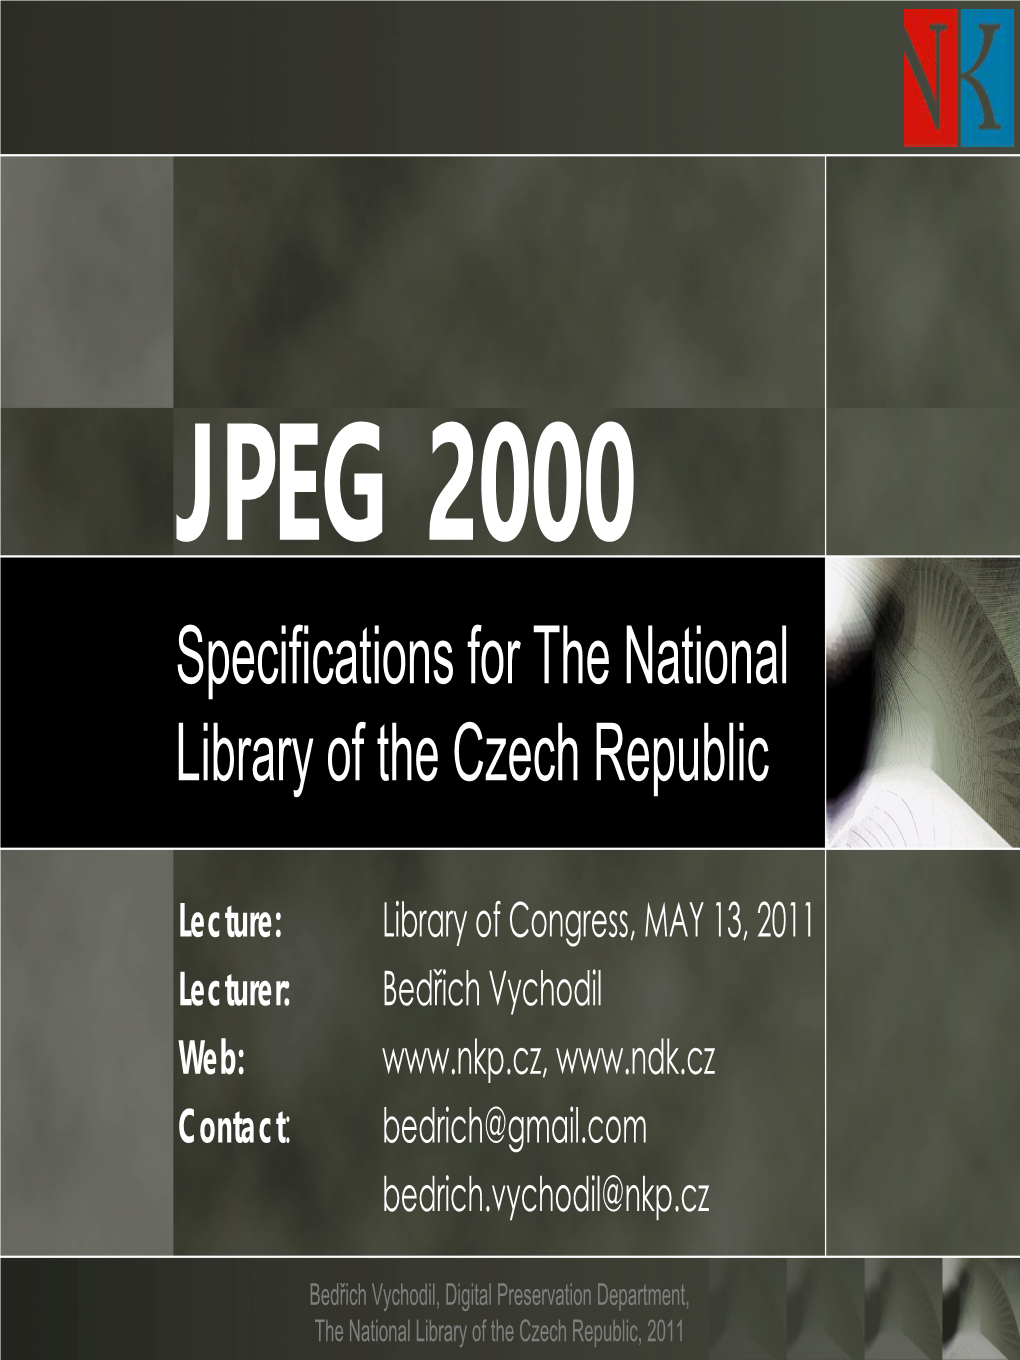 JPEG 2000 Specifications for the National Library of the Czech Republic